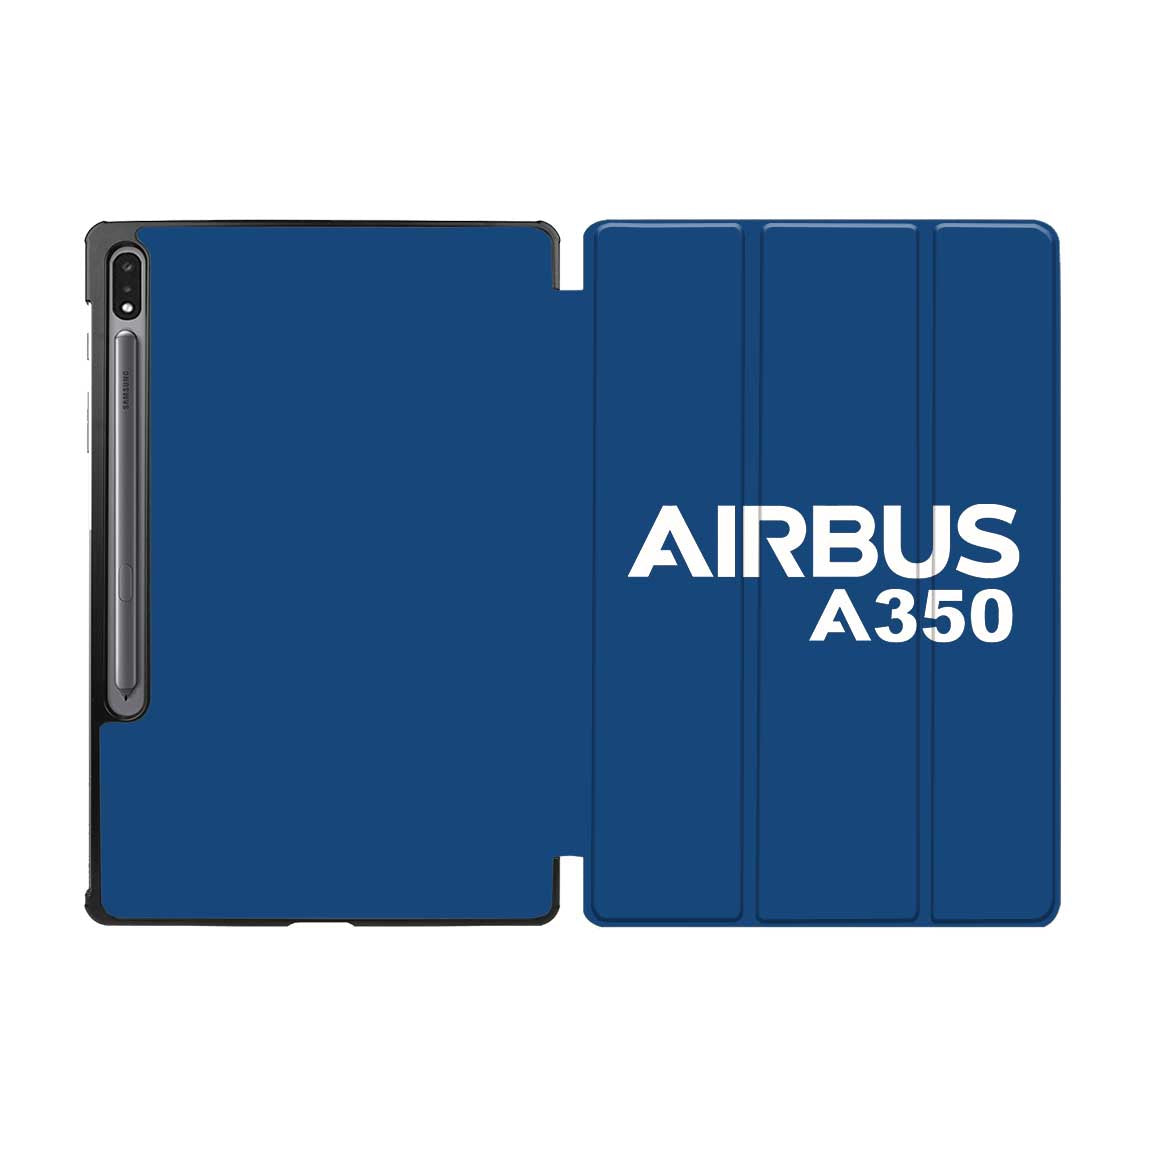 Airbus A350 & Text Designed Samsung Tablet Cases